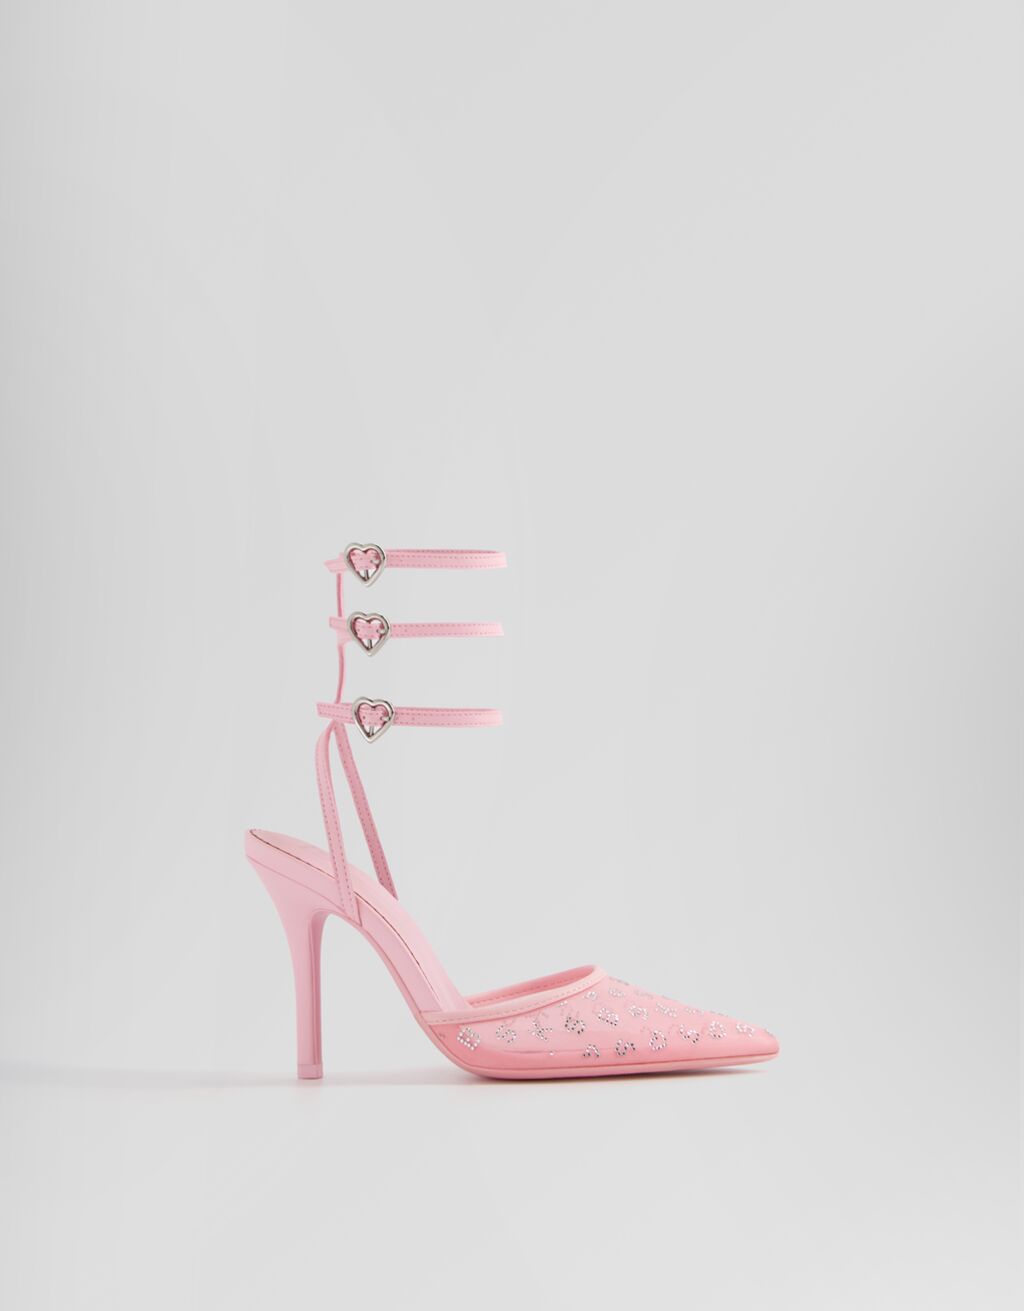 Shiny high-heel shoes with ankle straps and heart-shaped buckles.-Pink-5